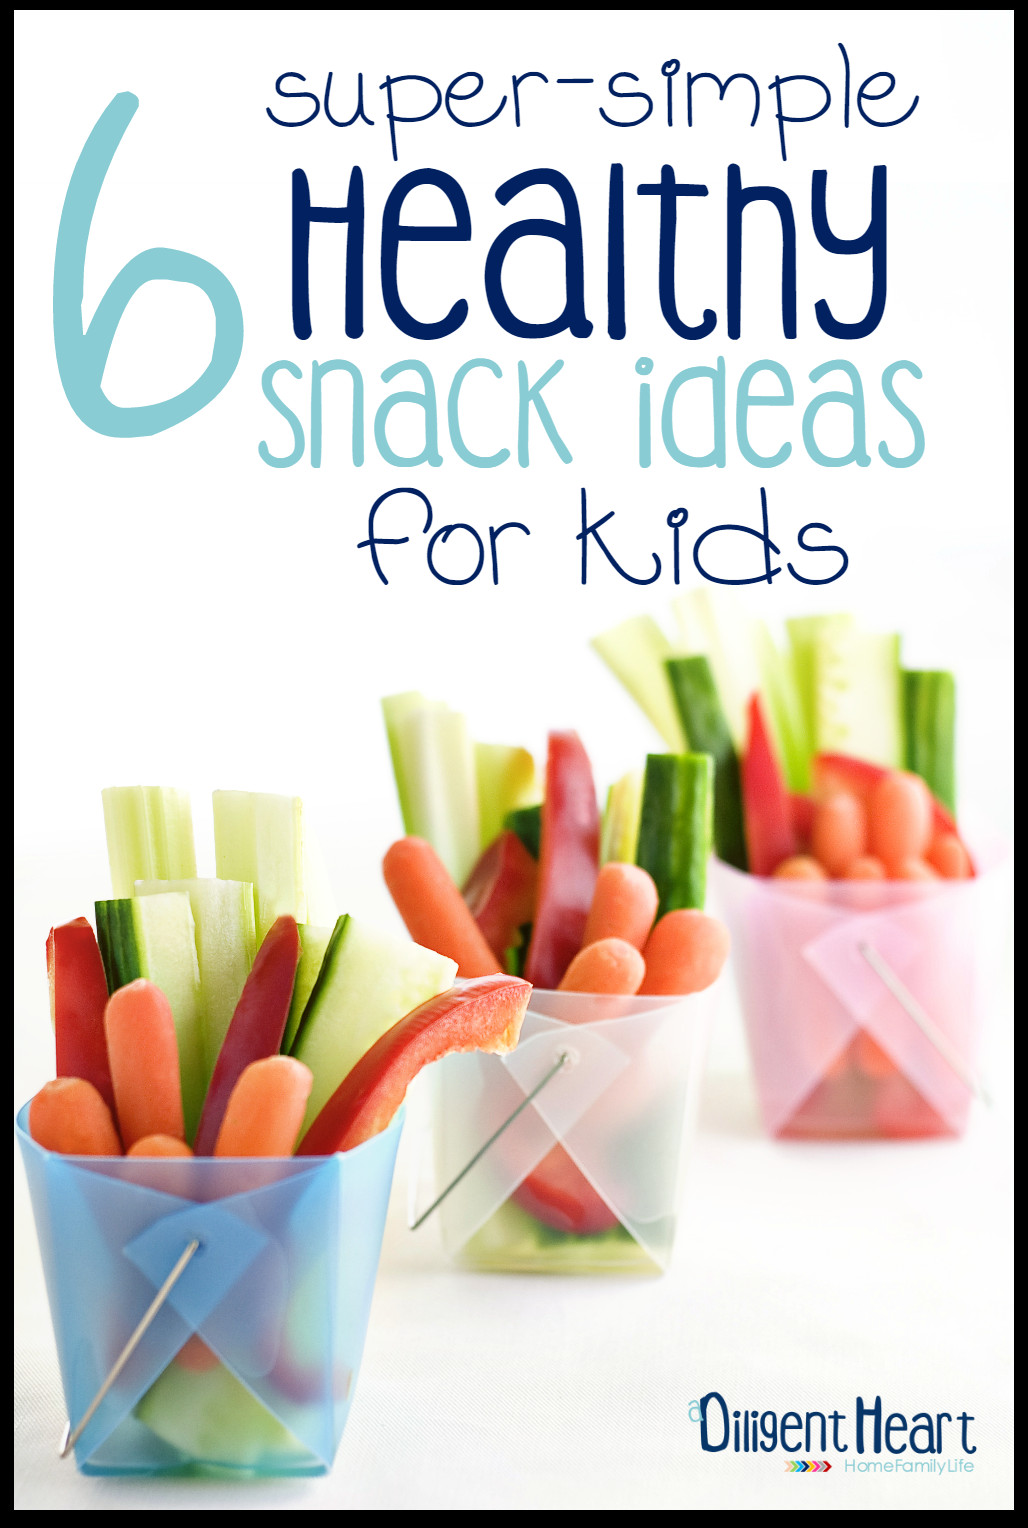 Heart Healthy Snacks On The Go
 6 Super Simple Healthy Snack Ideas For Kids